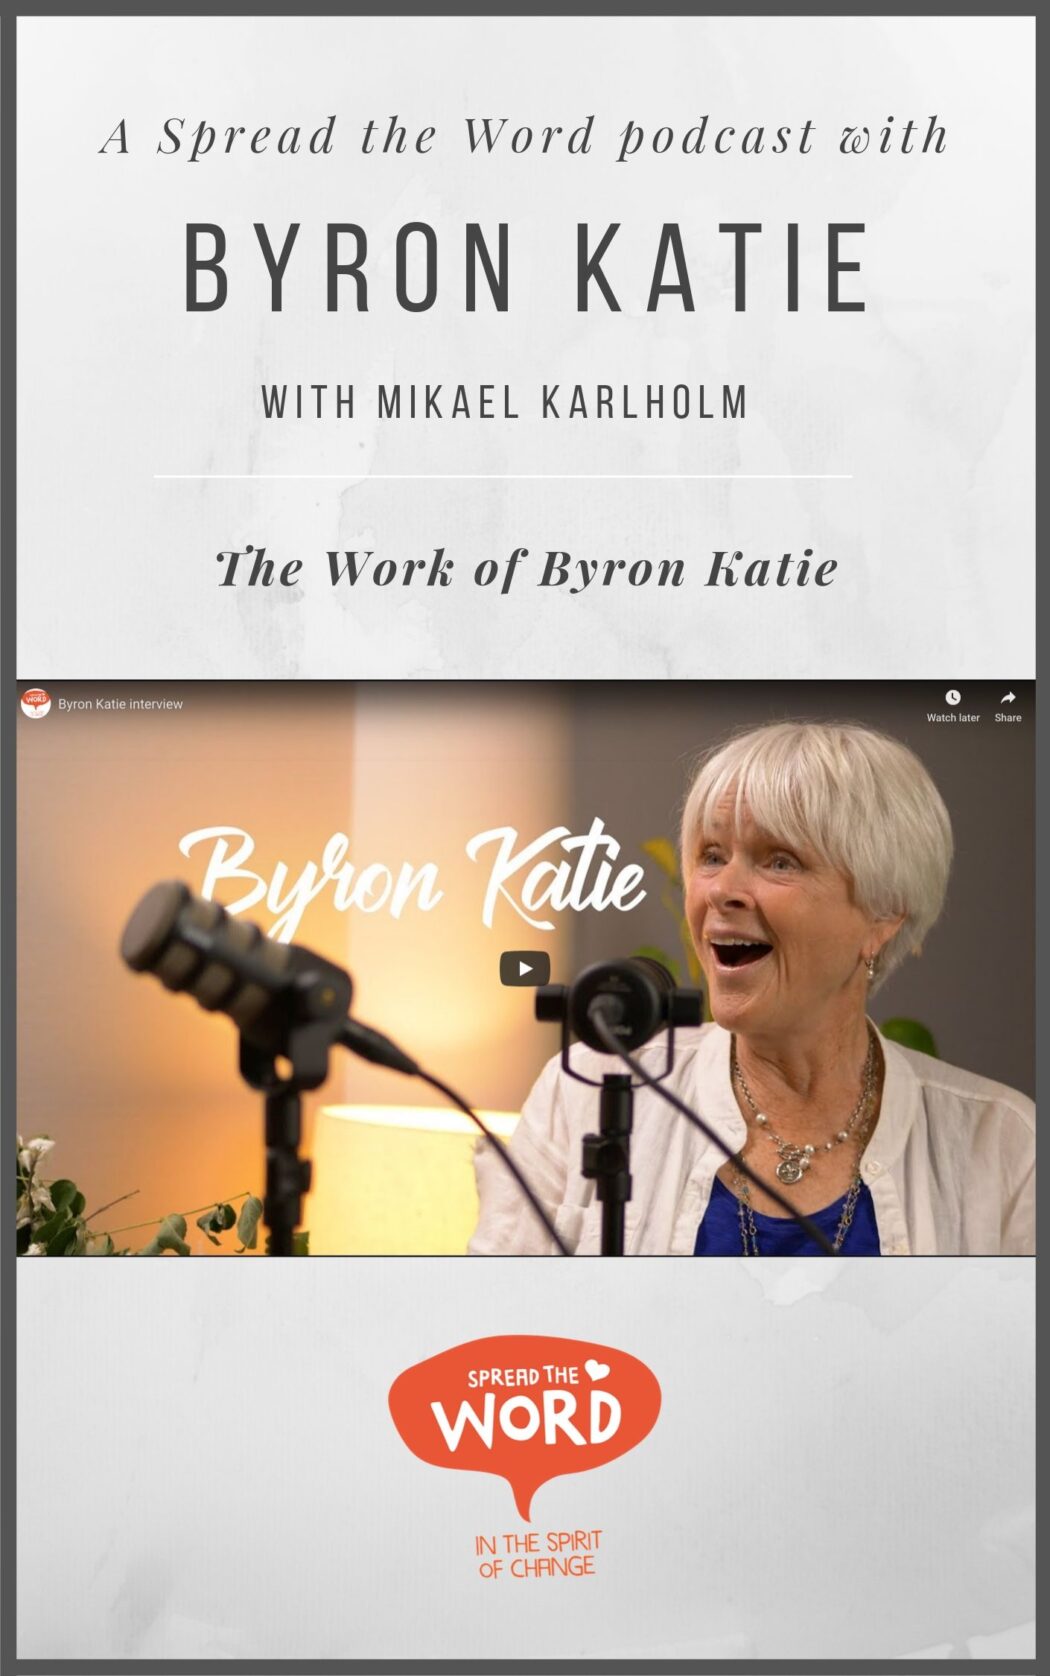 Podcast with Byron Katie and Michael Karlholm, Spread the word